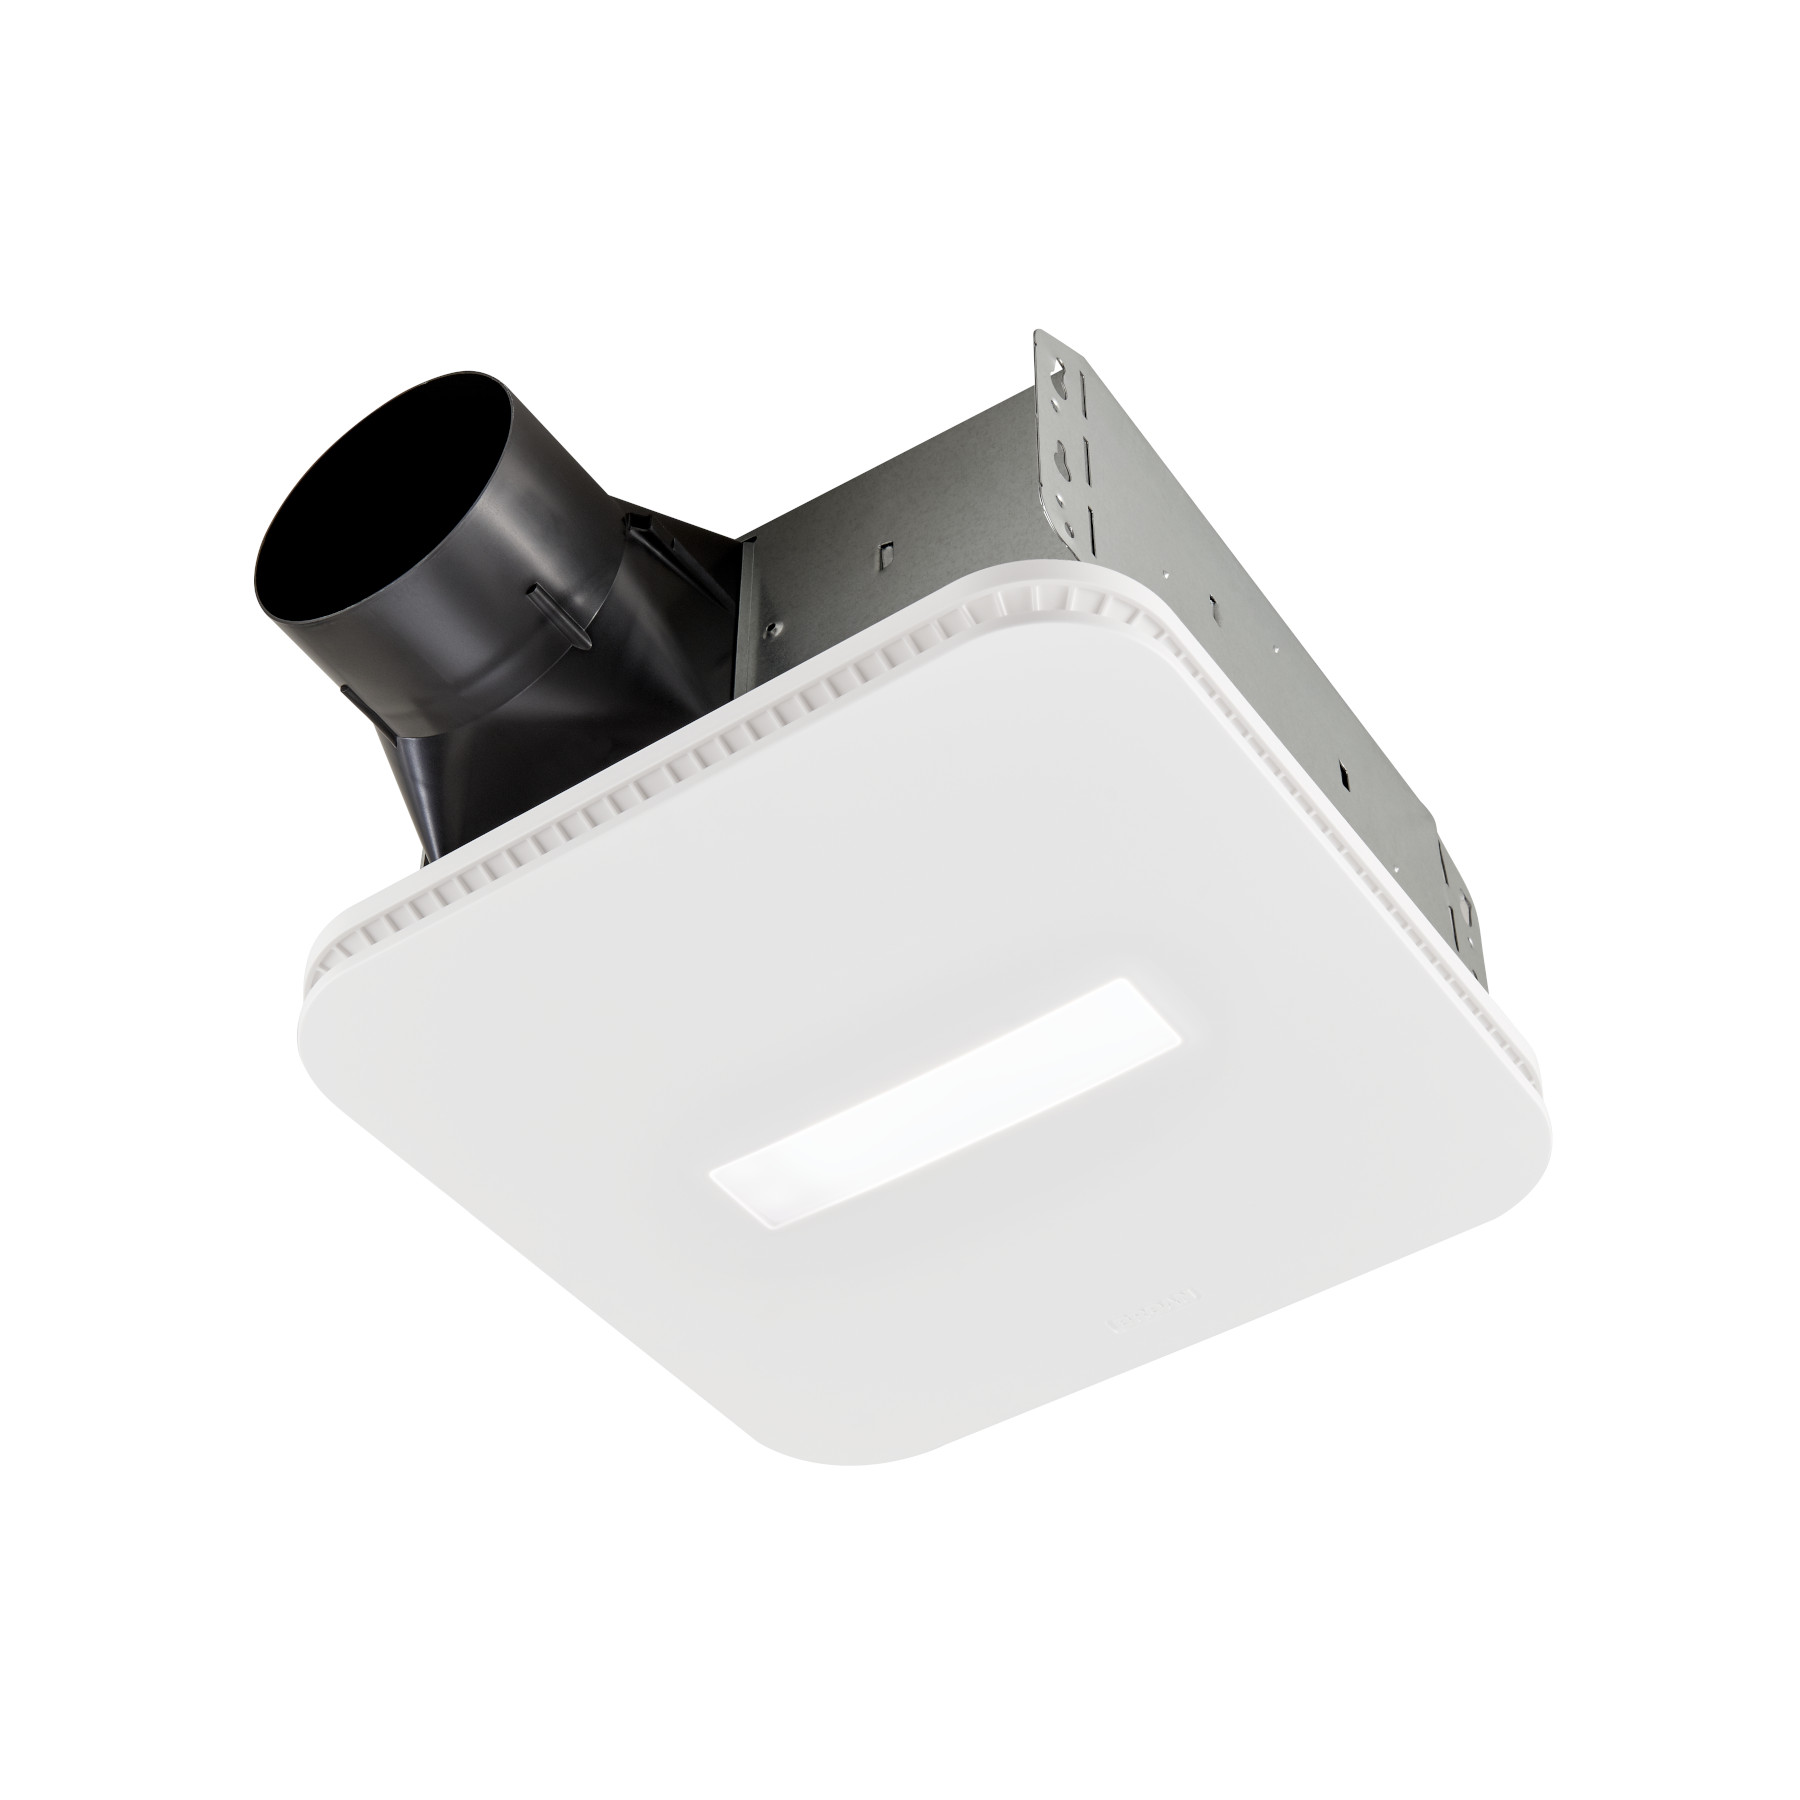 80 CFM Bathroom Exhaust Fan with LED Lighted CleanCover™ Grille, ENERGY STAR